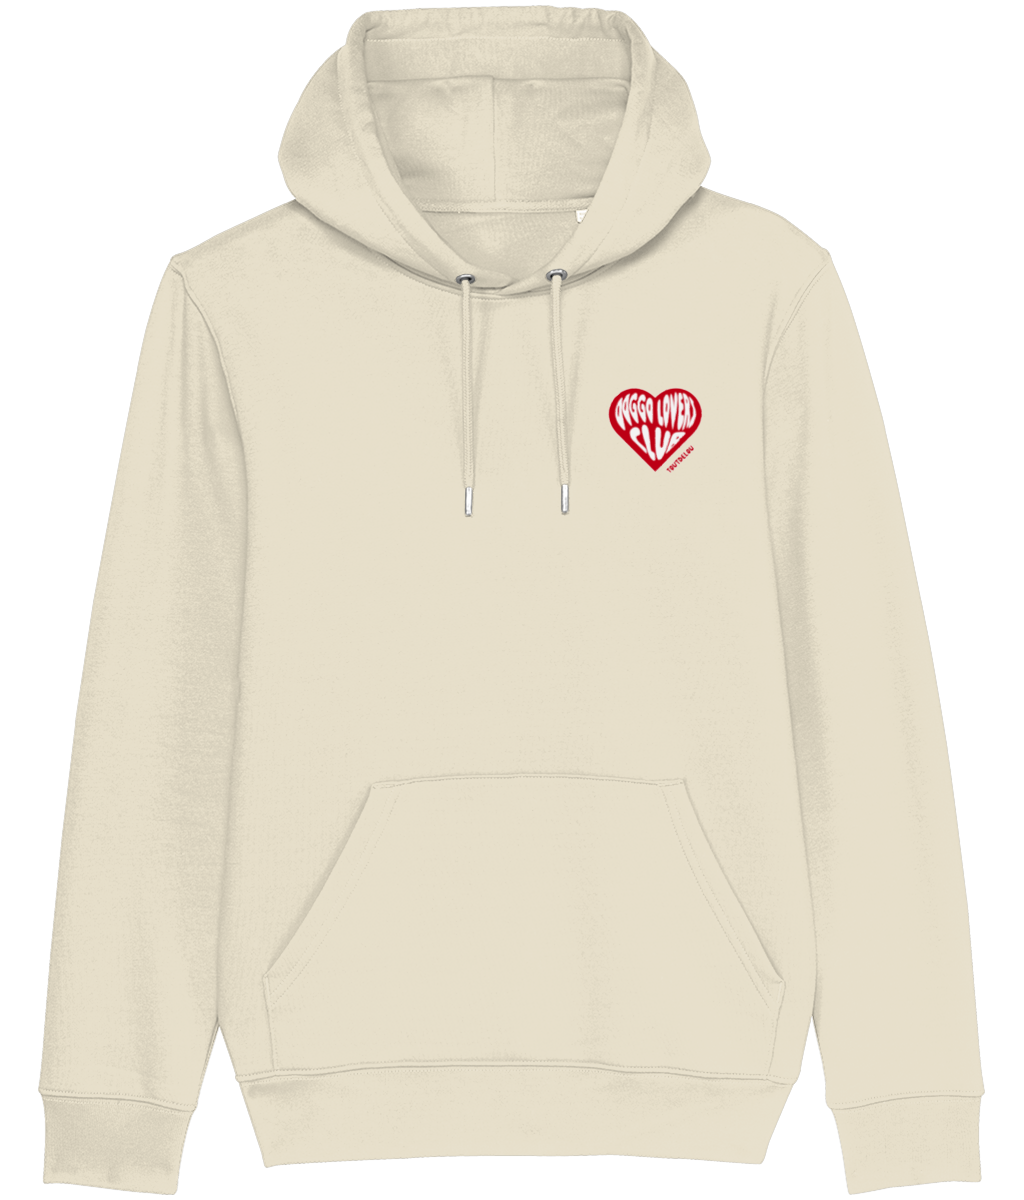 Hoodie -  dog lovers club - front and back